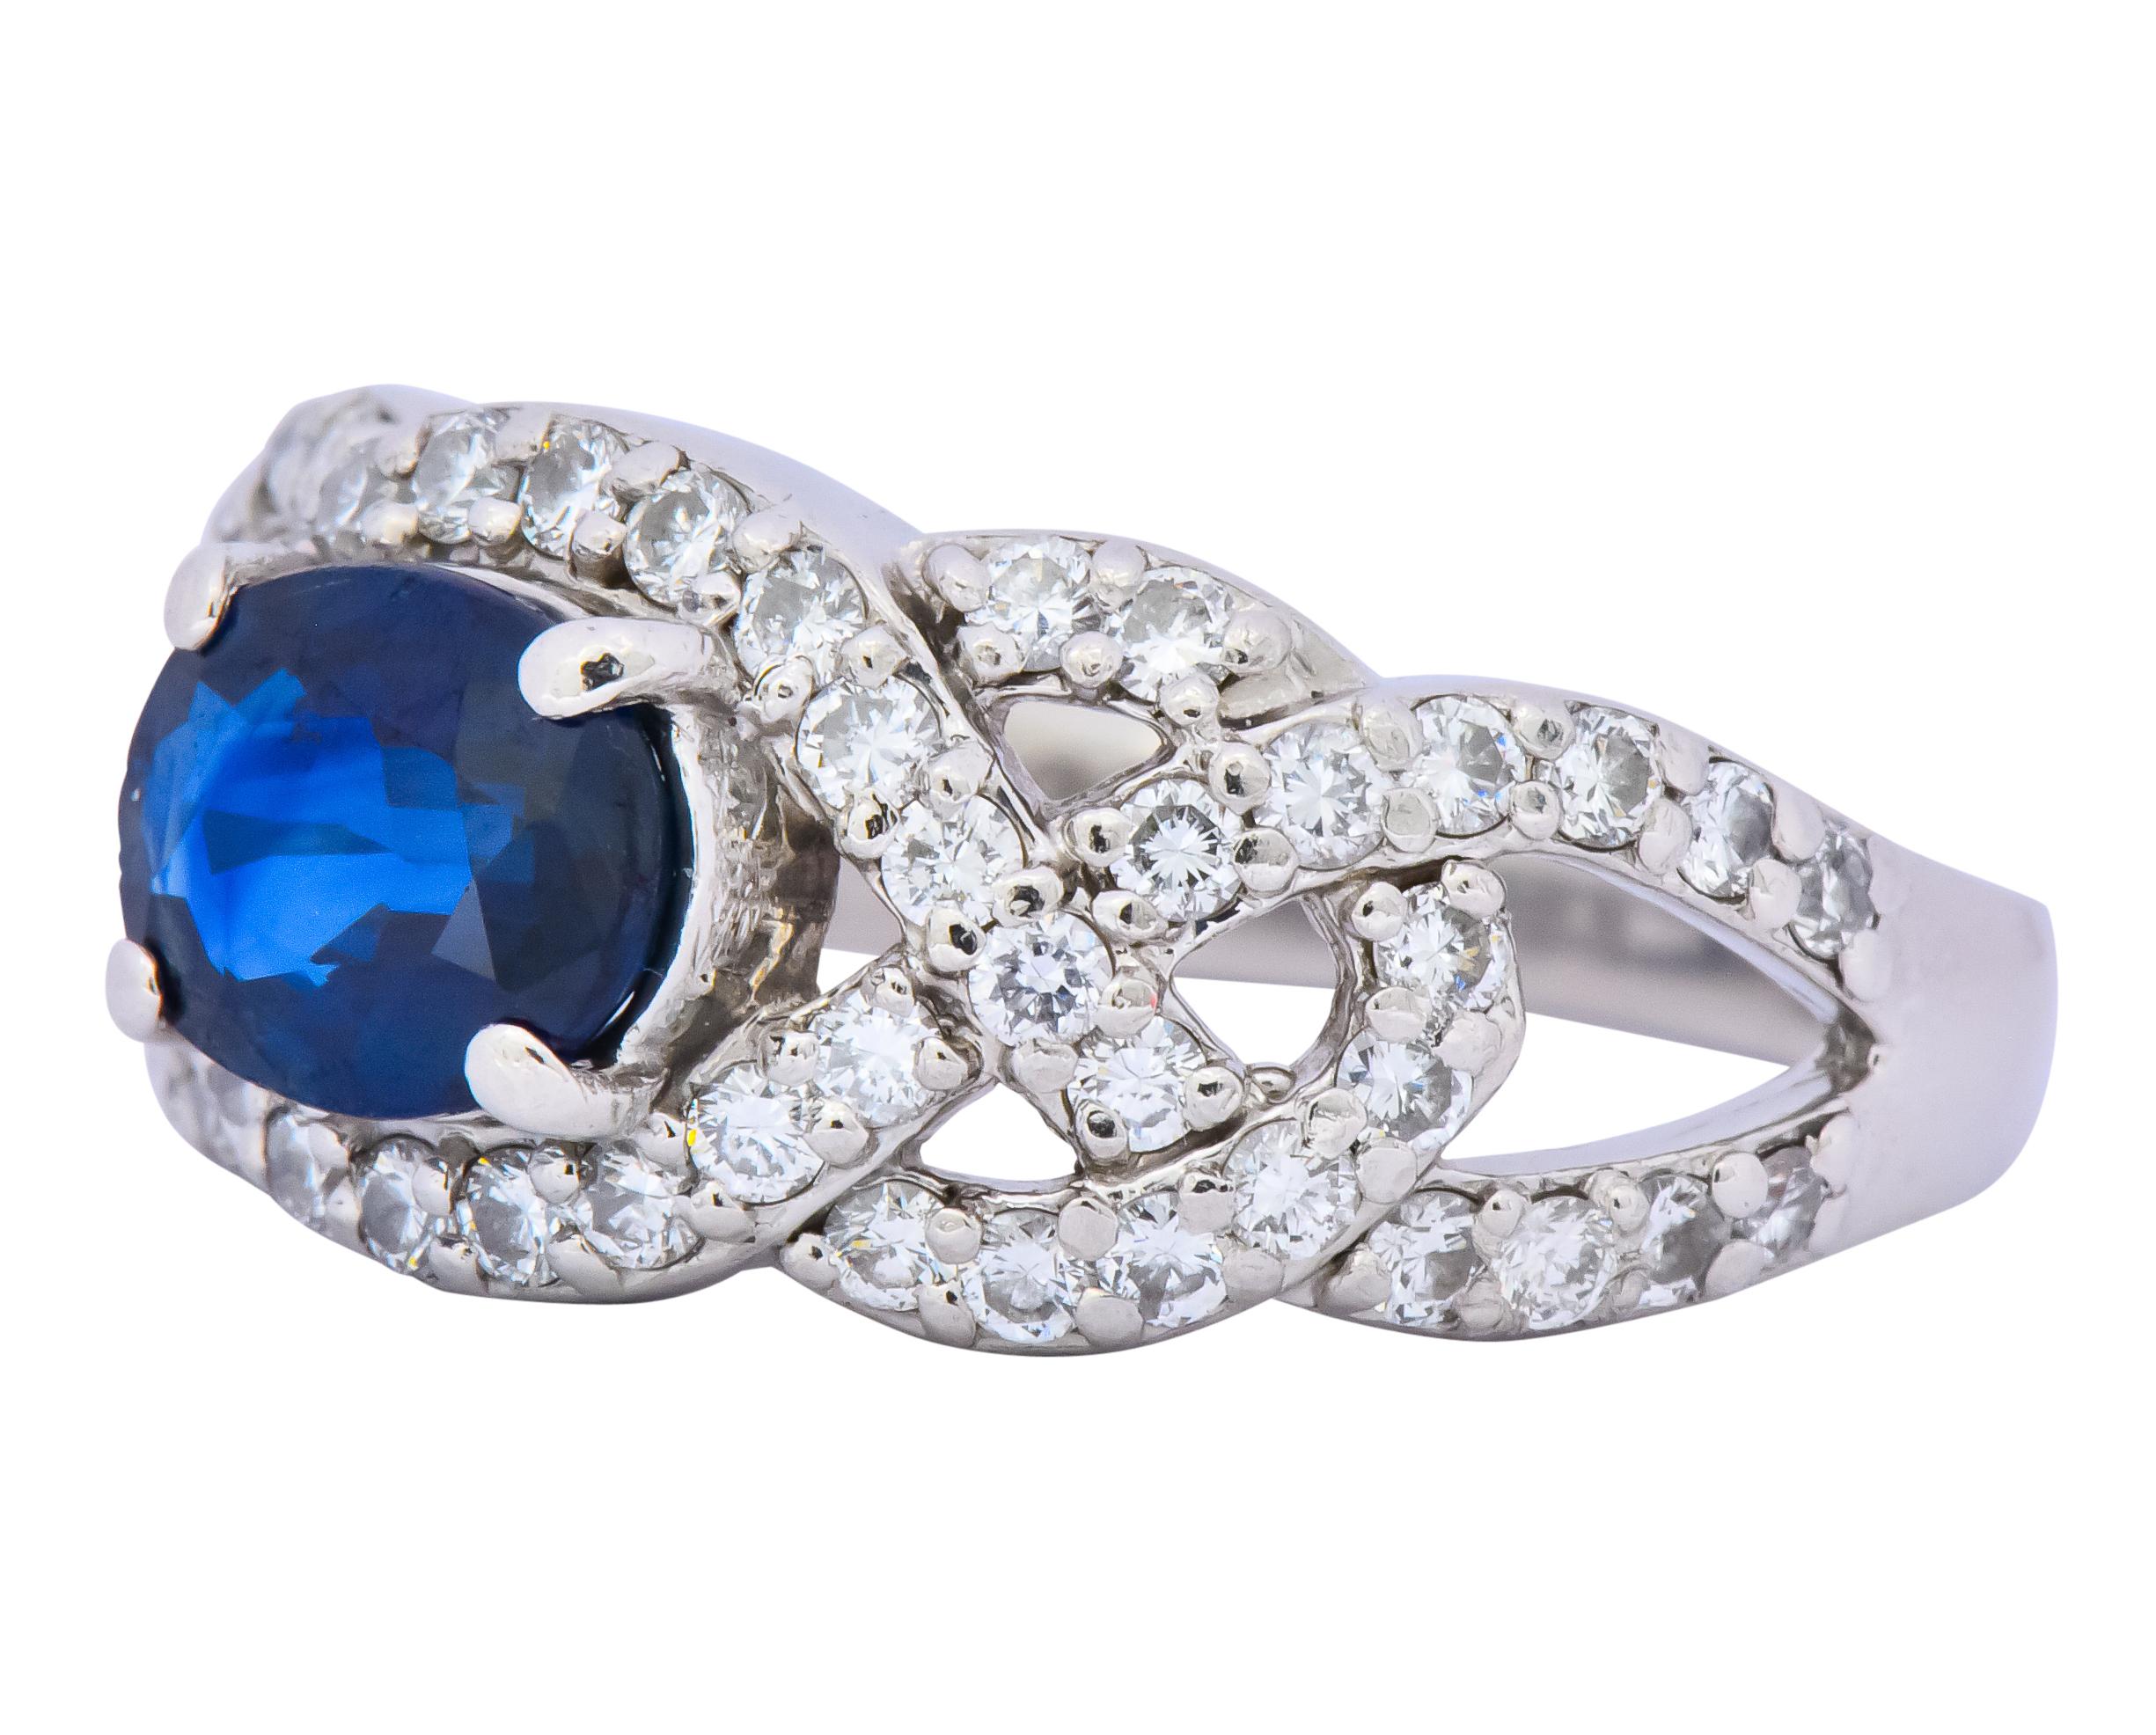 Centering an oval cut sapphire weighing approximately 1.30 carats, deep blue color

Accompanied by round brilliant cut diamond accents, weighing 0.77 carat total, GHI color and VS to SI clarity

Prong set sapphire with pierced woven lattice-style